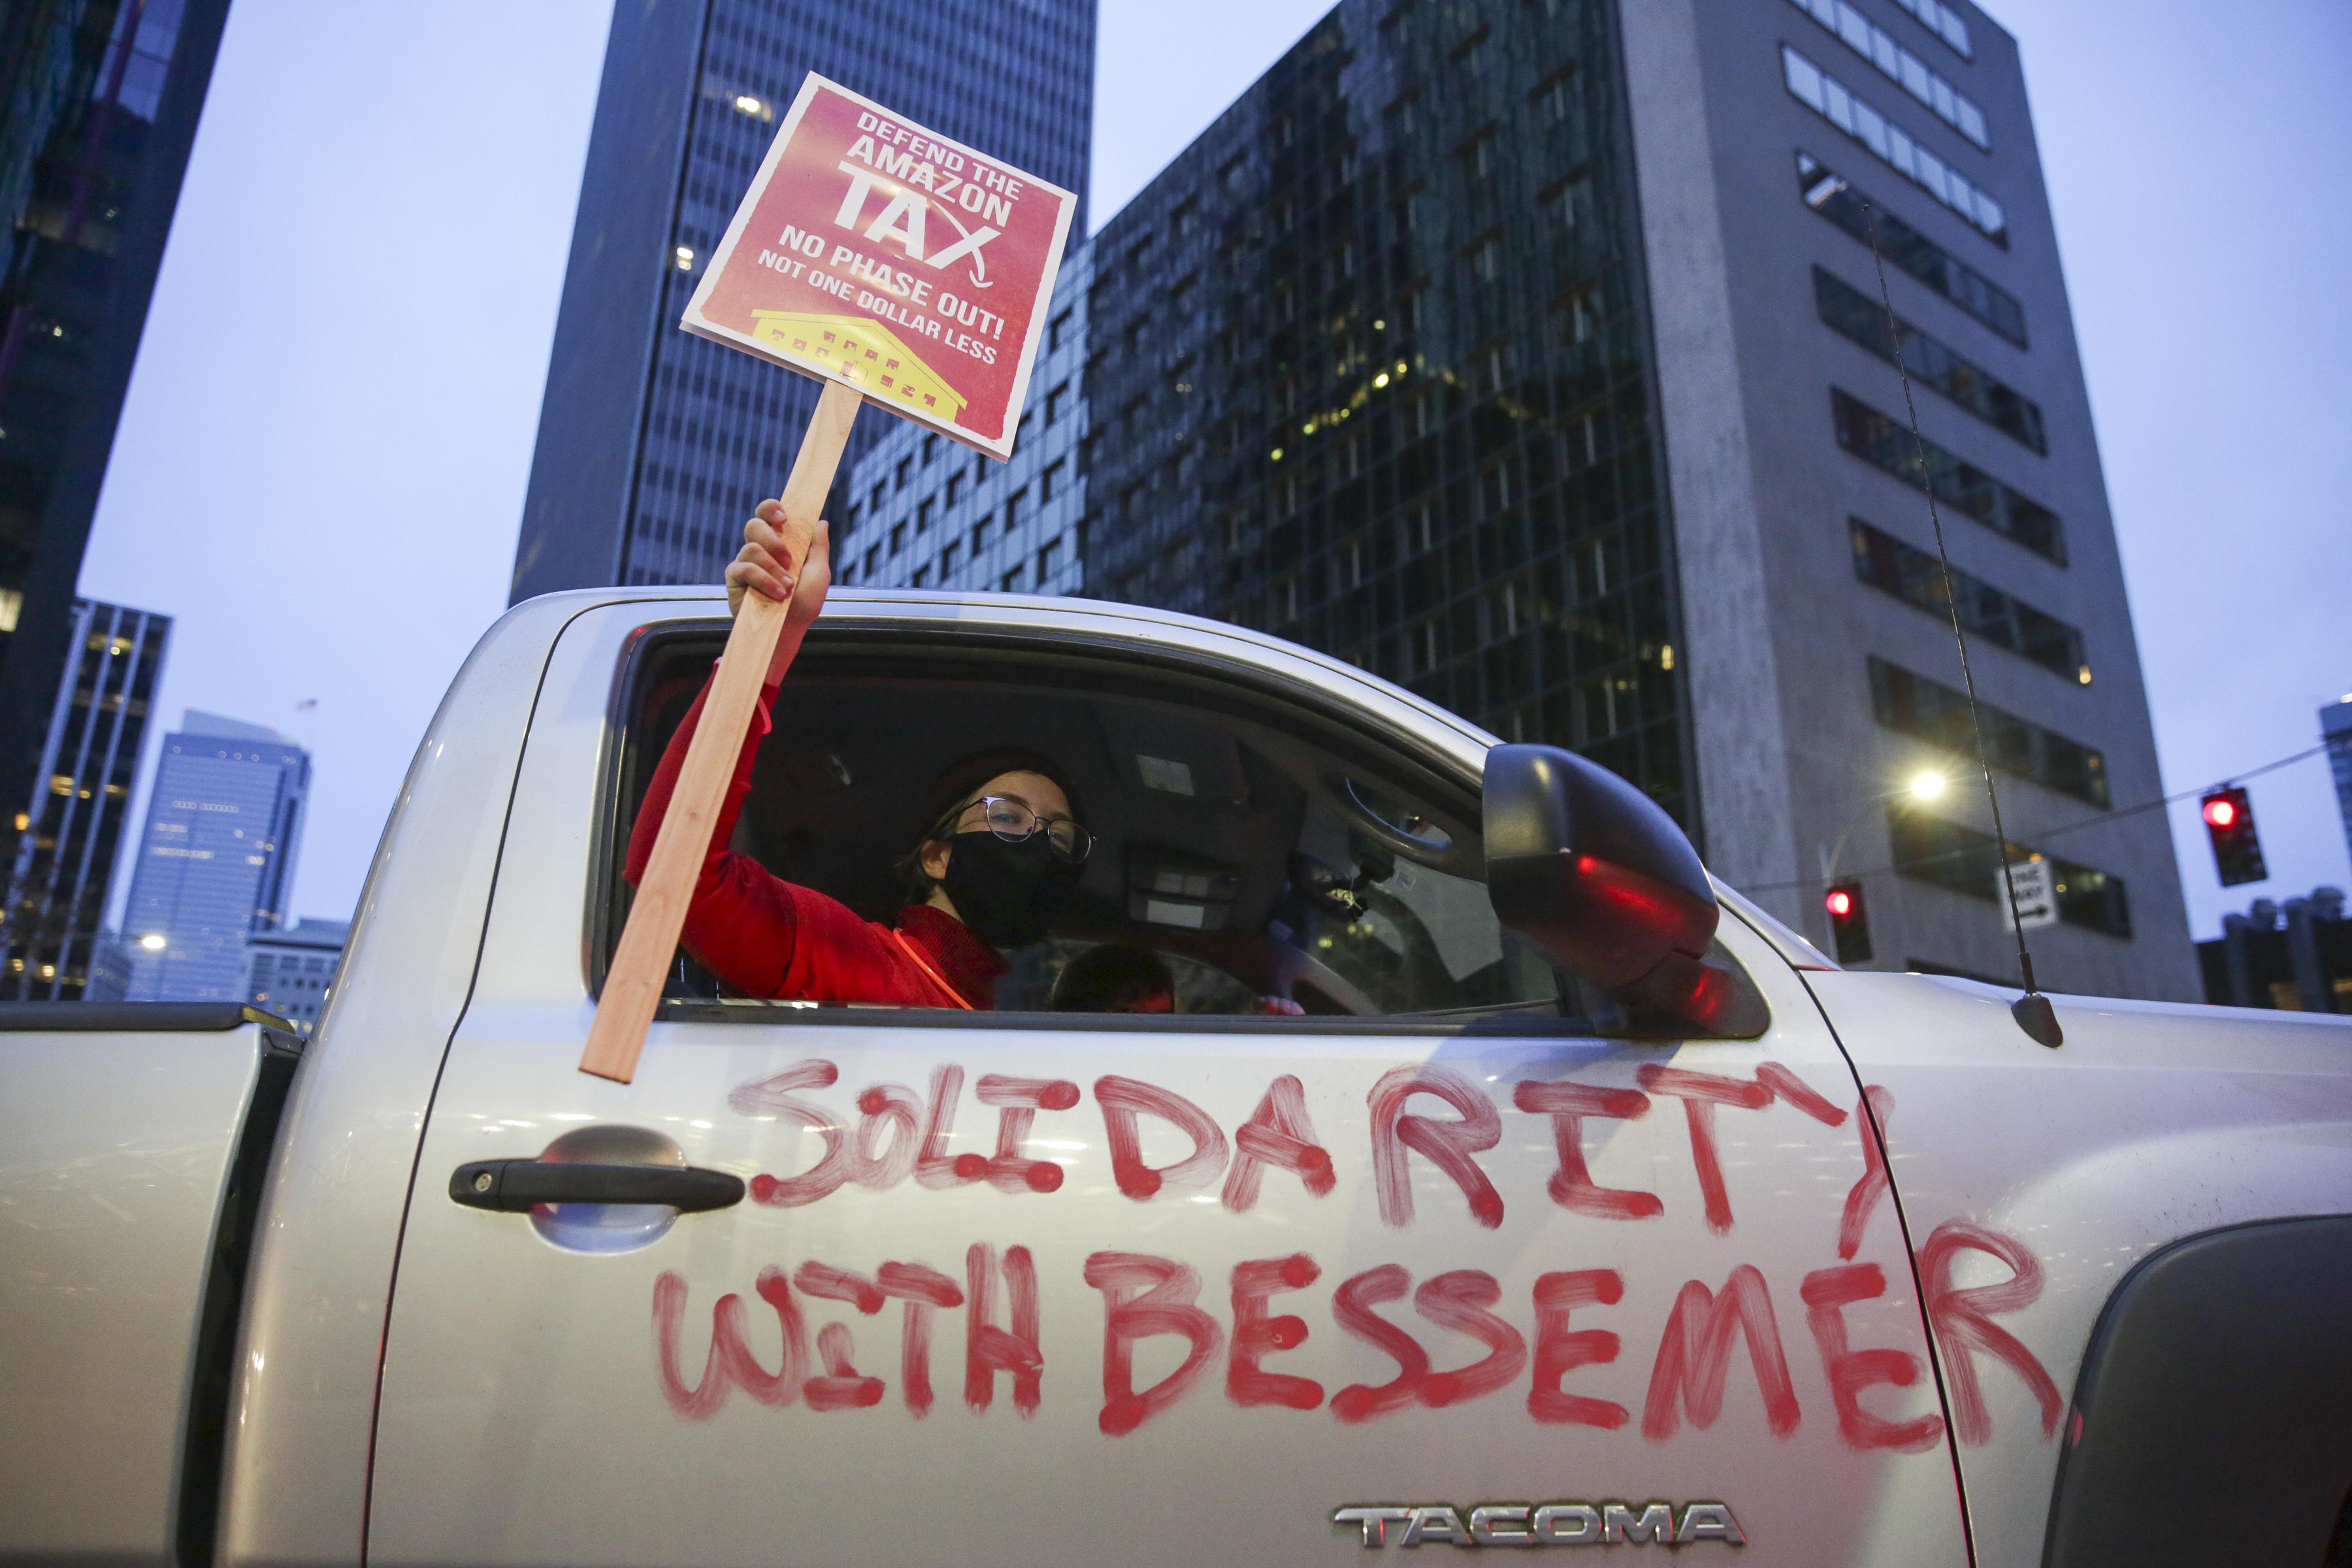 A demonstrator holds up a "Defend the Amazon Tax" sign through the passenger side window of a truck with "Solidarity With Bessemer" painted on the outside, part of a Tax Amazon car caravan.